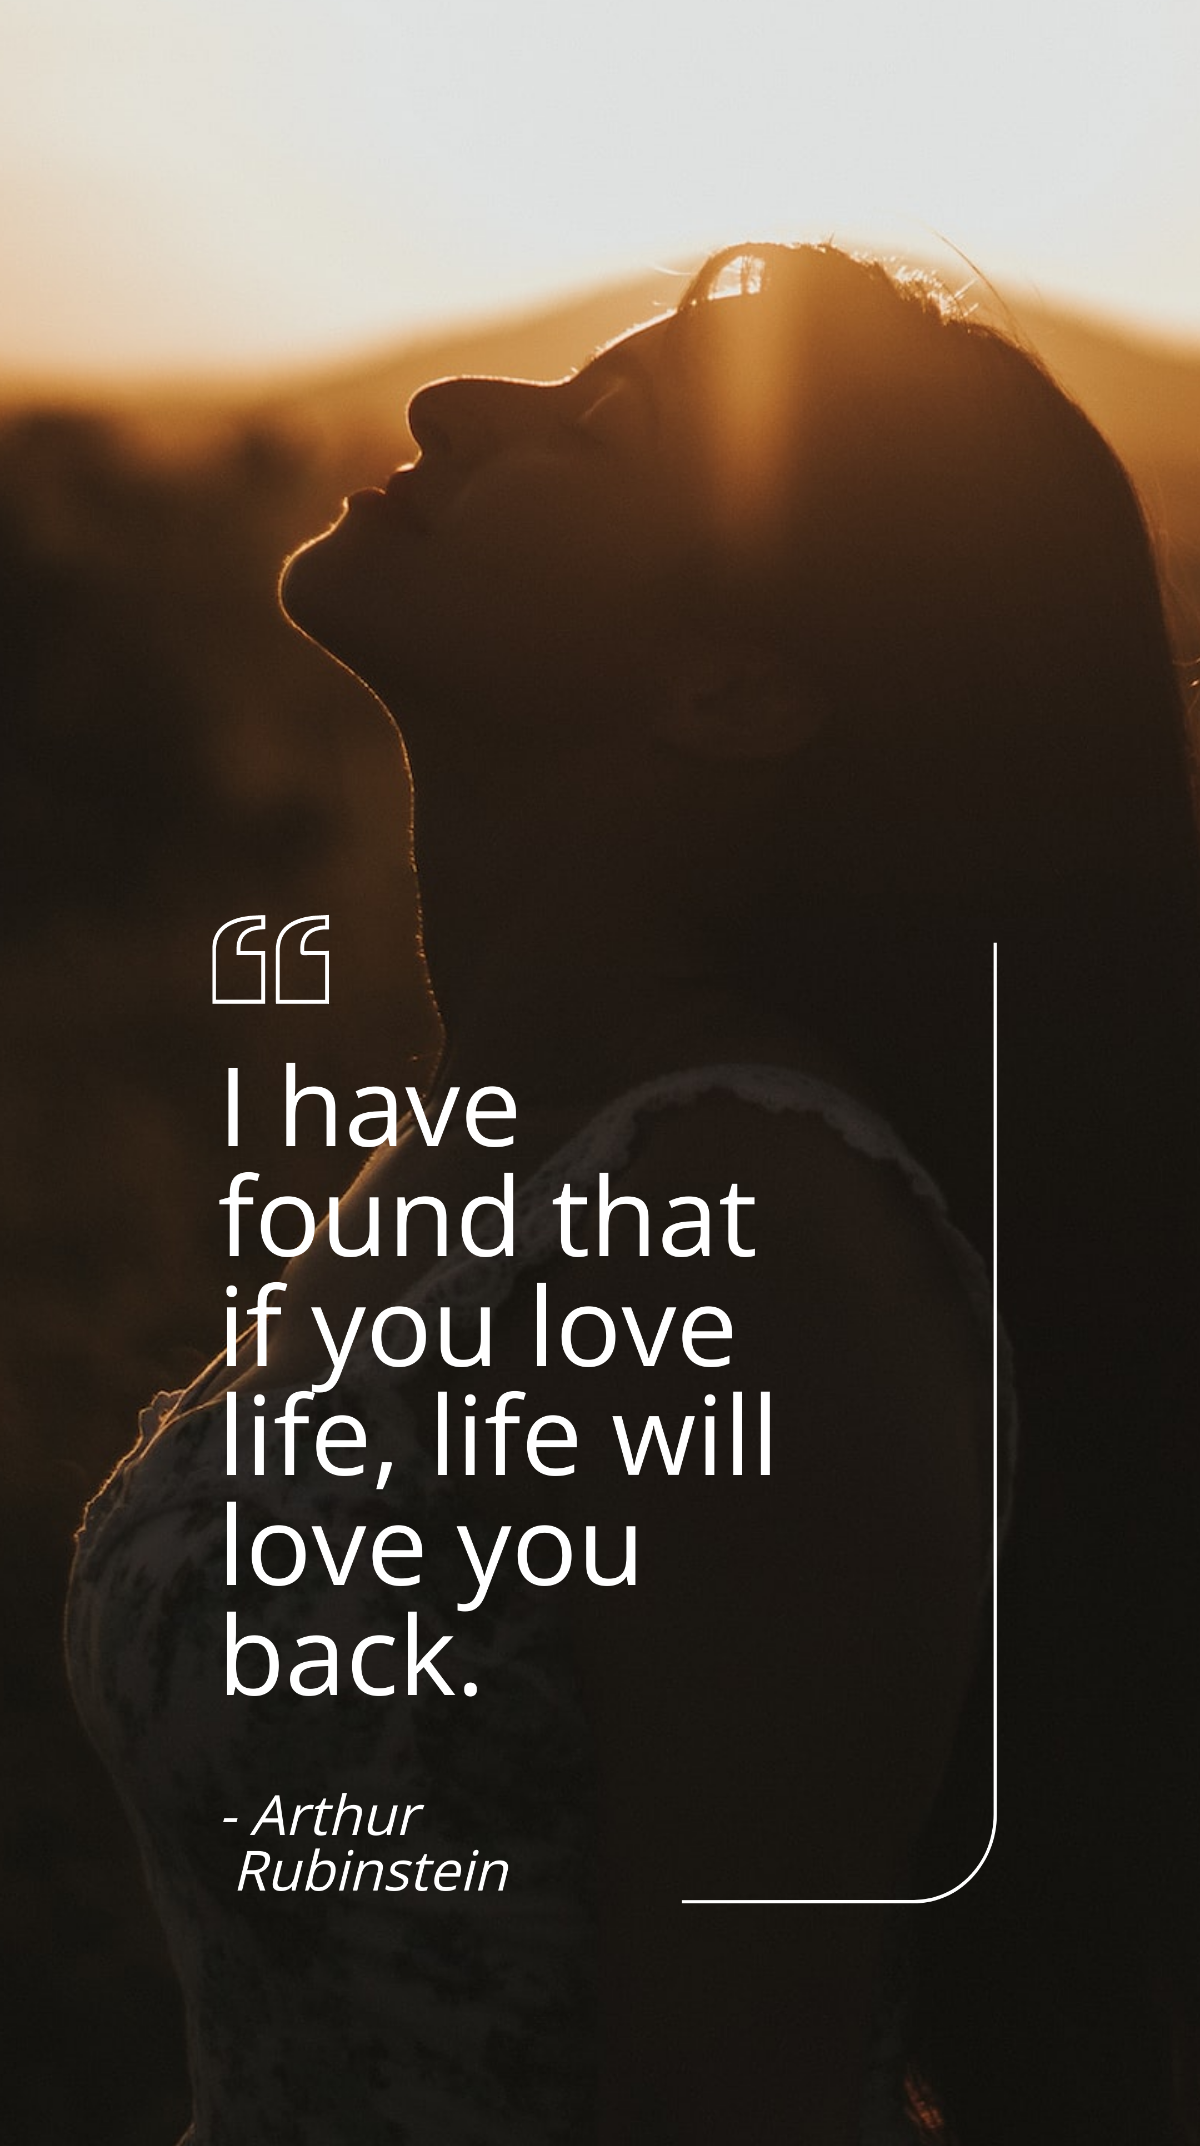 Arthur Rubinstein - I have found that if you love life, life will love you back. Template